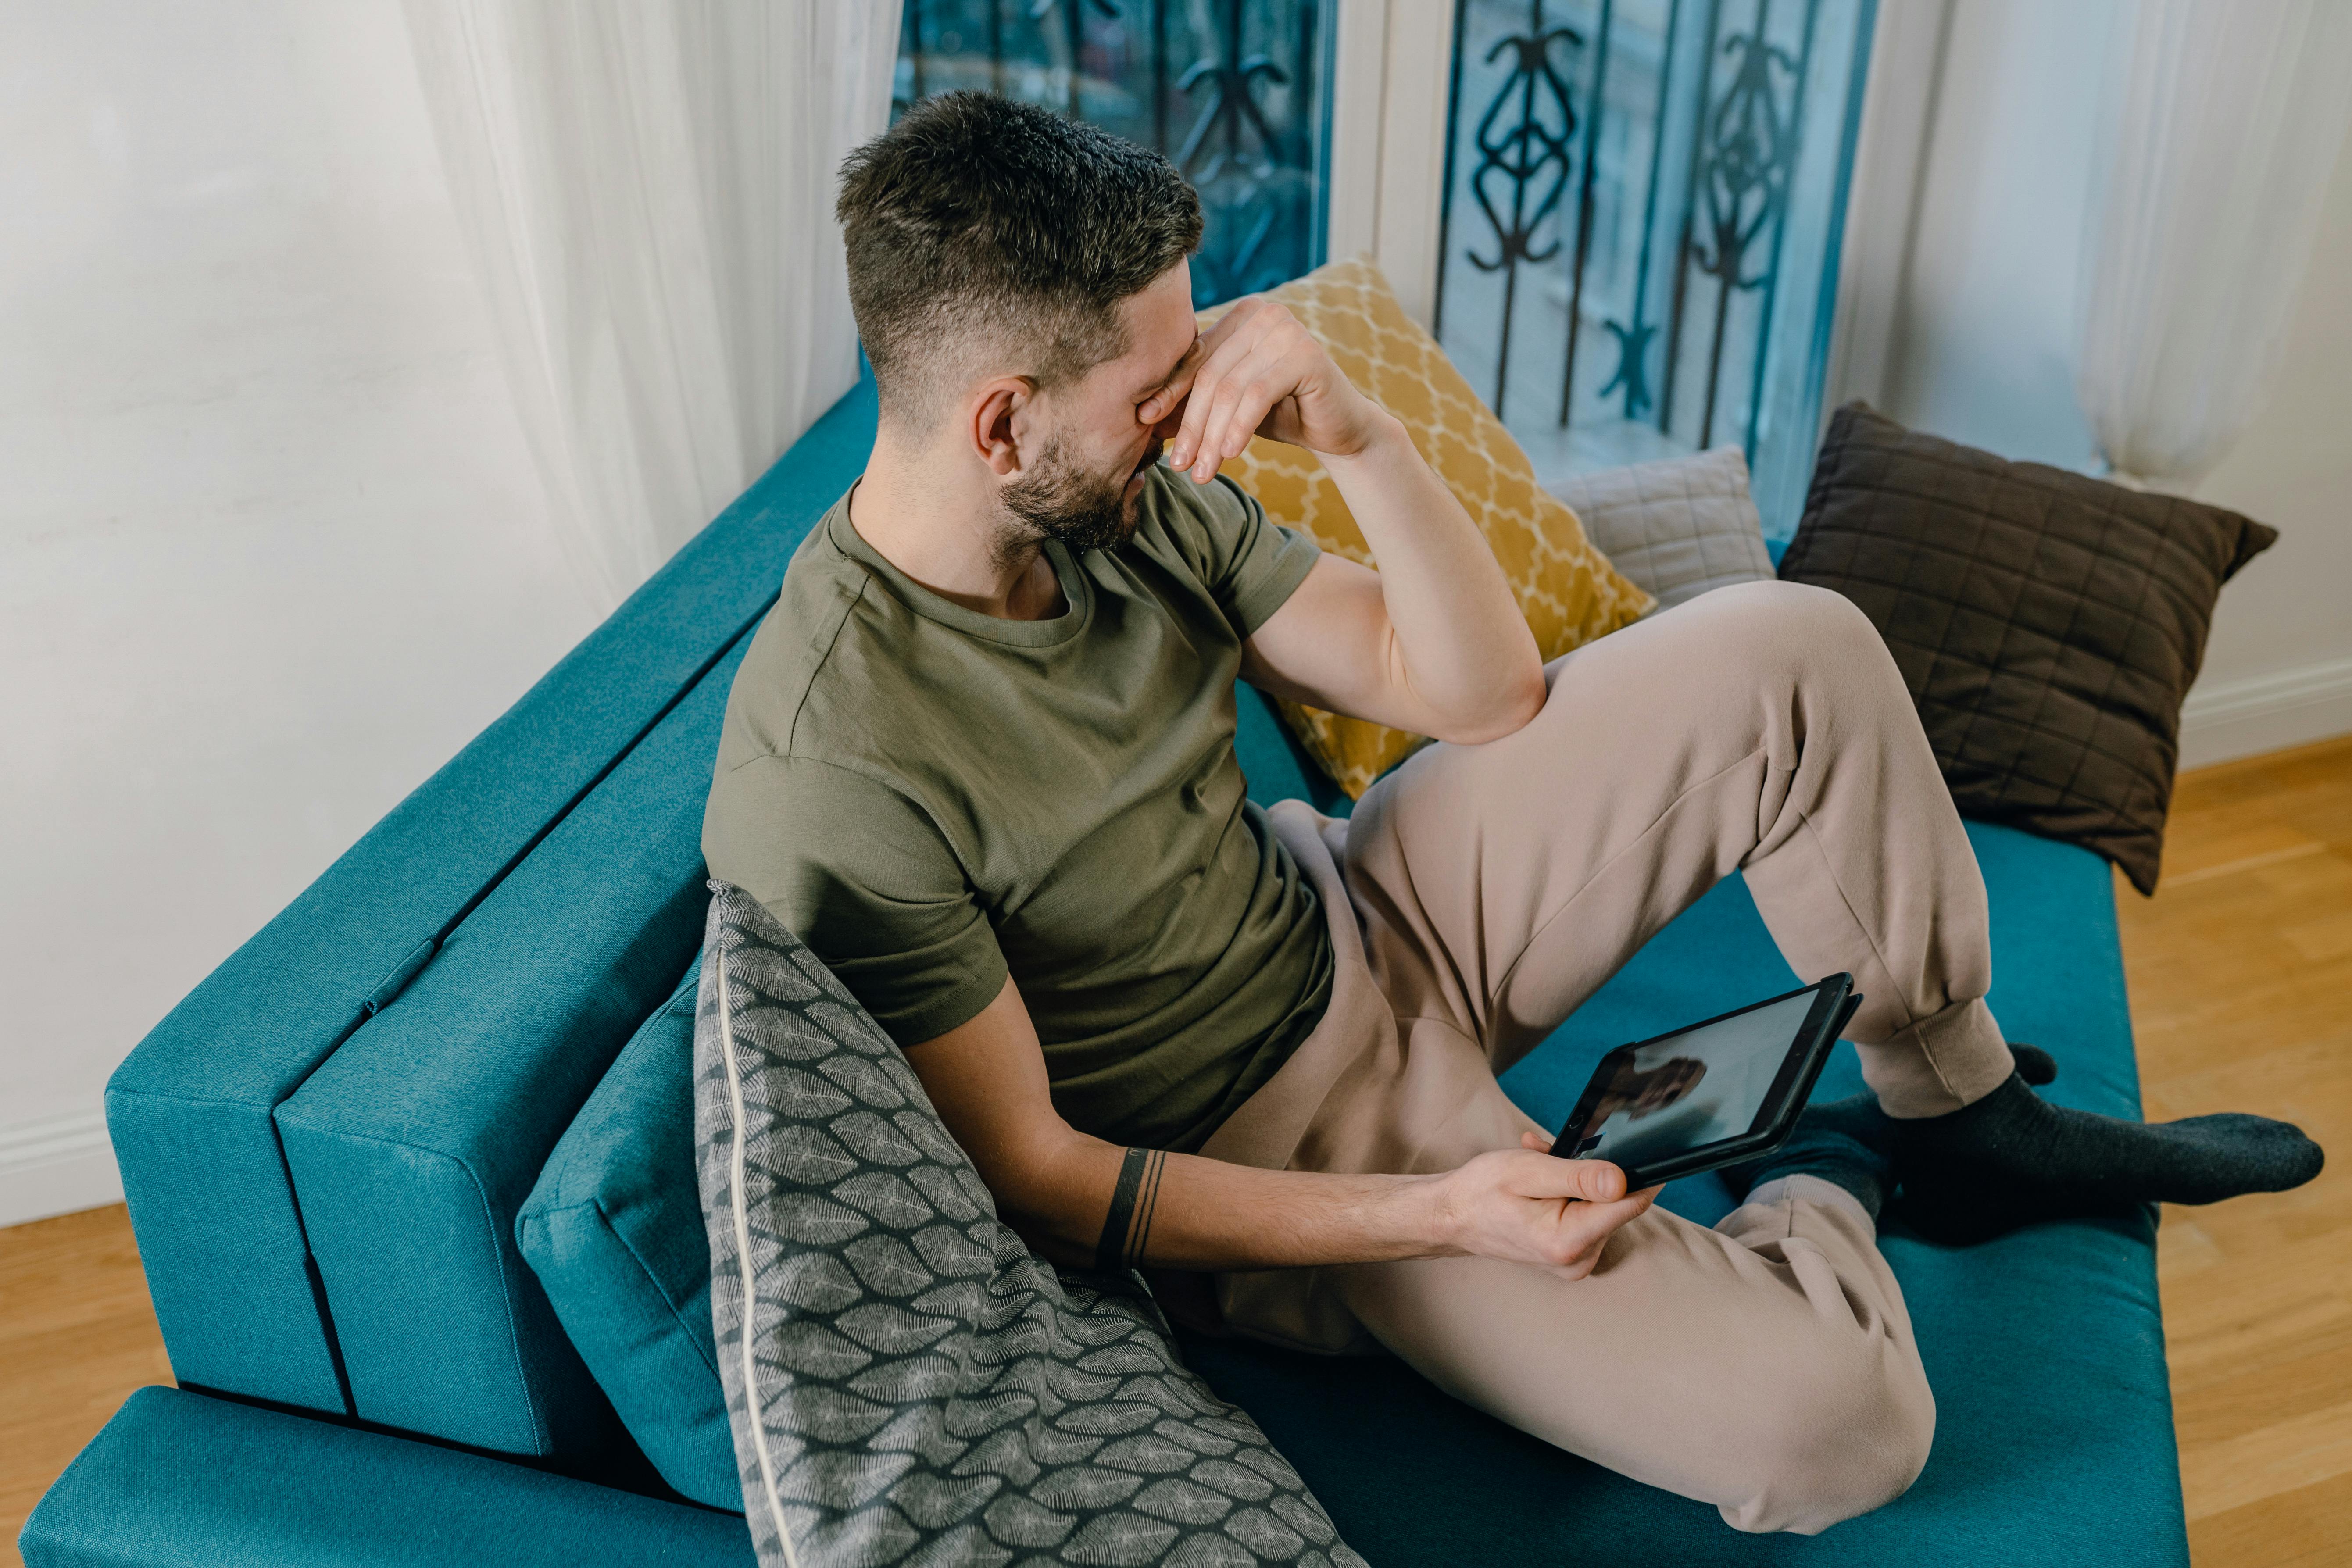 A man crying while sitting on a sofa | Source: Pexels